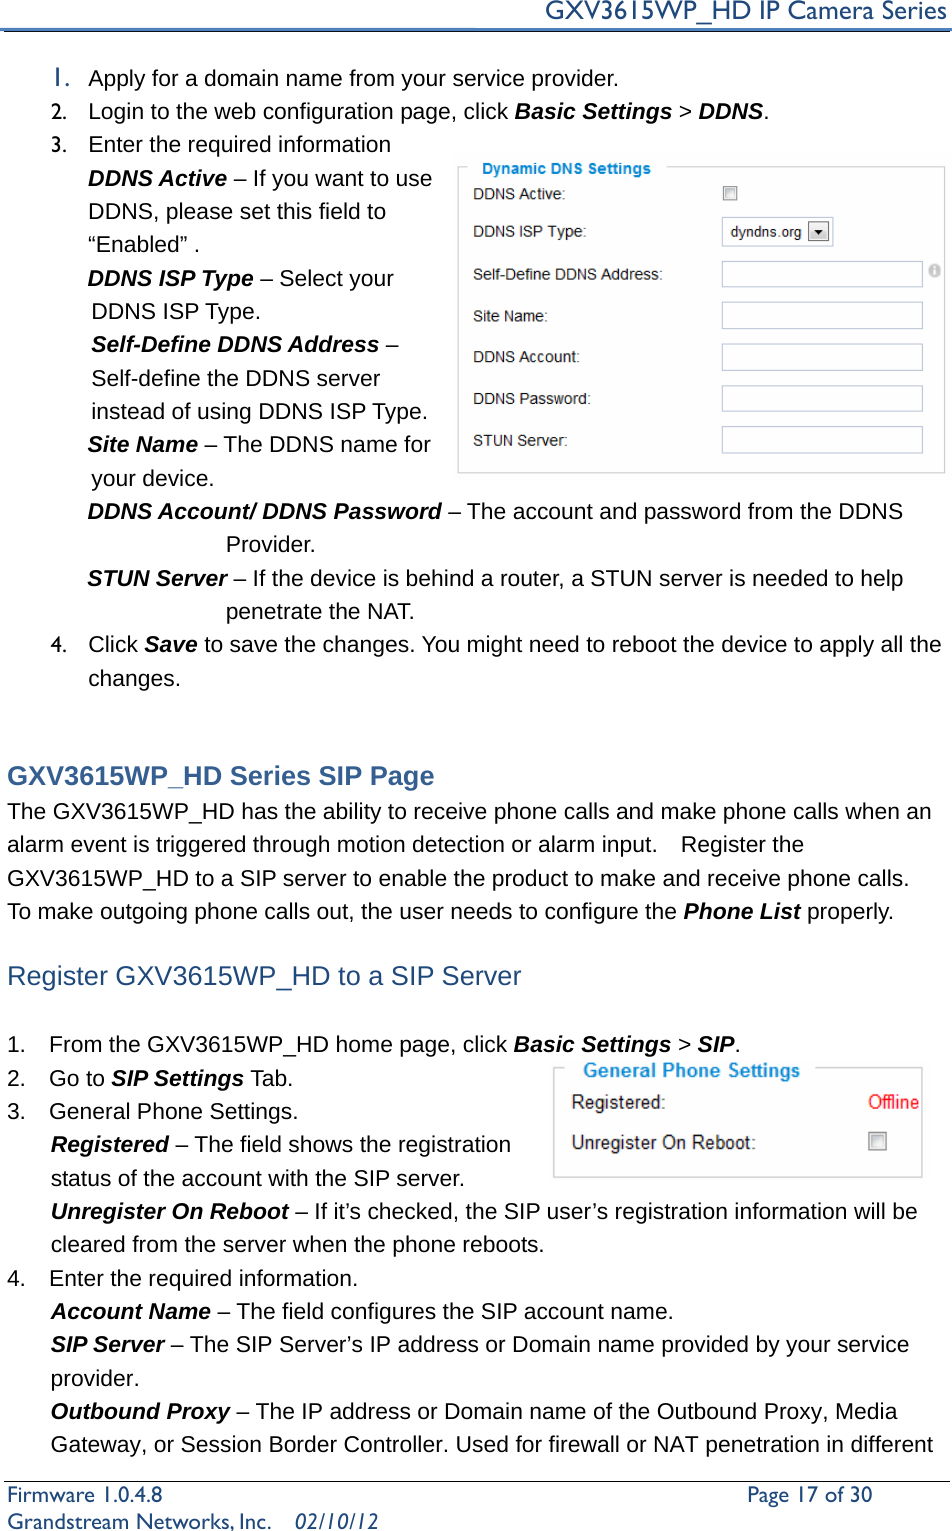     GXV3615WP_HD IP Camera Series Firmware 1.0.4.8                                                   Page 17 of 30     Grandstream Networks, Inc.  02/10/12  1. Apply for a domain name from your service provider. 2.  Login to the web configuration page, click Basic Settings &gt; DDNS.   3.  Enter the required information   DDNS Active – If you want to use DDNS, please set this field to “Enabled” .        DDNS ISP Type – Select your DDNS ISP Type. Self-Define DDNS Address – Self-define the DDNS server instead of using DDNS ISP Type.        Site Name – The DDNS name for your device.        DDNS Account/ DDNS Password – The account and password from the DDNS        Provider.        STUN Server – If the device is behind a router, a STUN server is needed to help penetrate the NAT. 4. Click Save to save the changes. You might need to reboot the device to apply all the changes.    GXV3615WP_HD Series SIP Page The GXV3615WP_HD has the ability to receive phone calls and make phone calls when an alarm event is triggered through motion detection or alarm input.    Register the GXV3615WP_HD to a SIP server to enable the product to make and receive phone calls.   To make outgoing phone calls out, the user needs to configure the Phone List properly.  Register GXV3615WP_HD to a SIP Server  1.    From the GXV3615WP_HD home page, click Basic Settings &gt; SIP. 2.  Go to SIP Settings Tab. 3.  General Phone Settings. Registered – The field shows the registration status of the account with the SIP server.   Unregister On Reboot – If it’s checked, the SIP user’s registration information will be cleared from the server when the phone reboots. 4.    Enter the required information. Account Name – The field configures the SIP account name. SIP Server – The SIP Server’s IP address or Domain name provided by your service provider. Outbound Proxy – The IP address or Domain name of the Outbound Proxy, Media Gateway, or Session Border Controller. Used for firewall or NAT penetration in different 